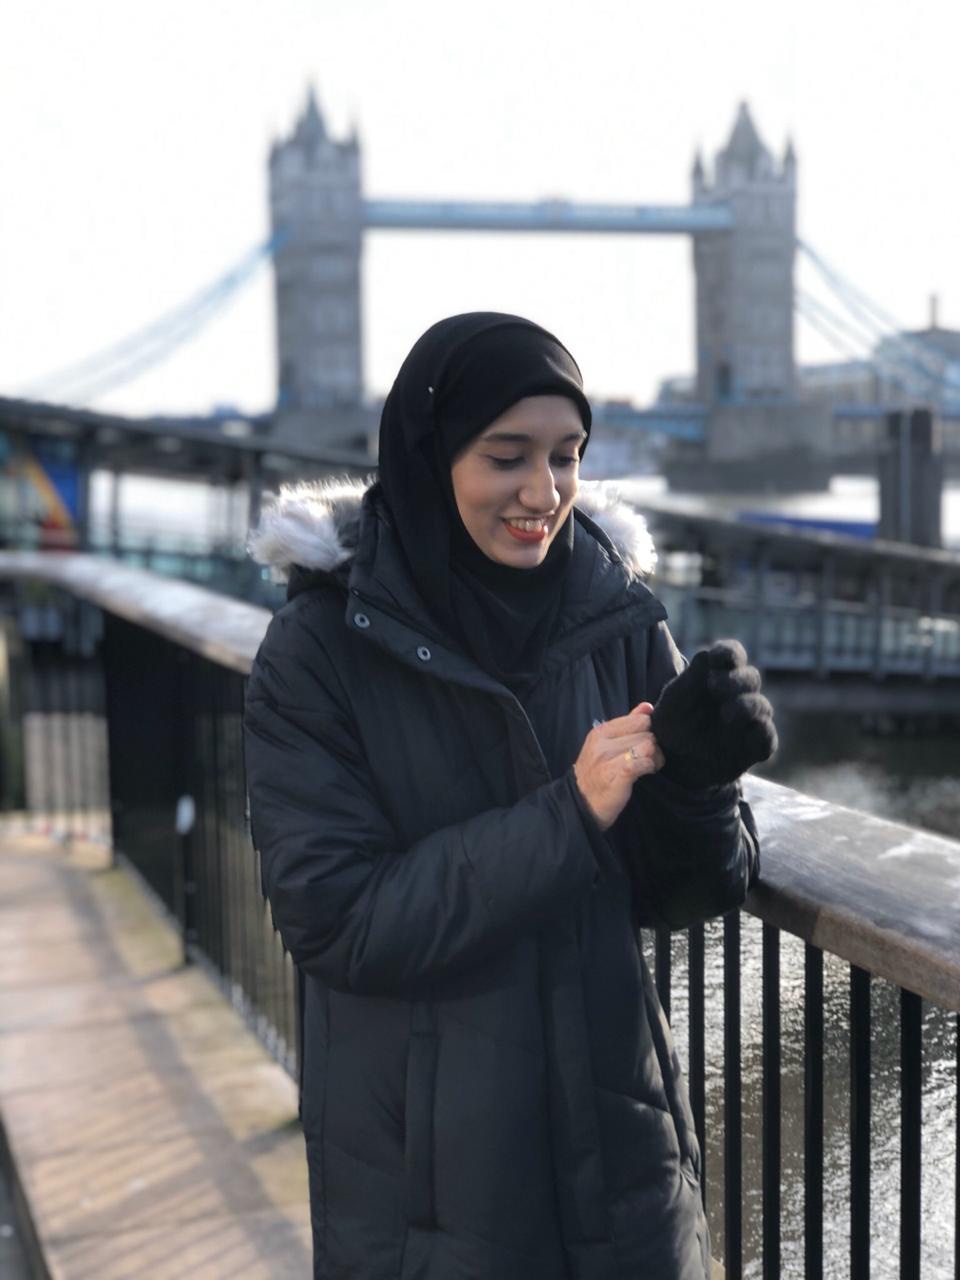 Things I said Alhumdulillah for in December 2019…